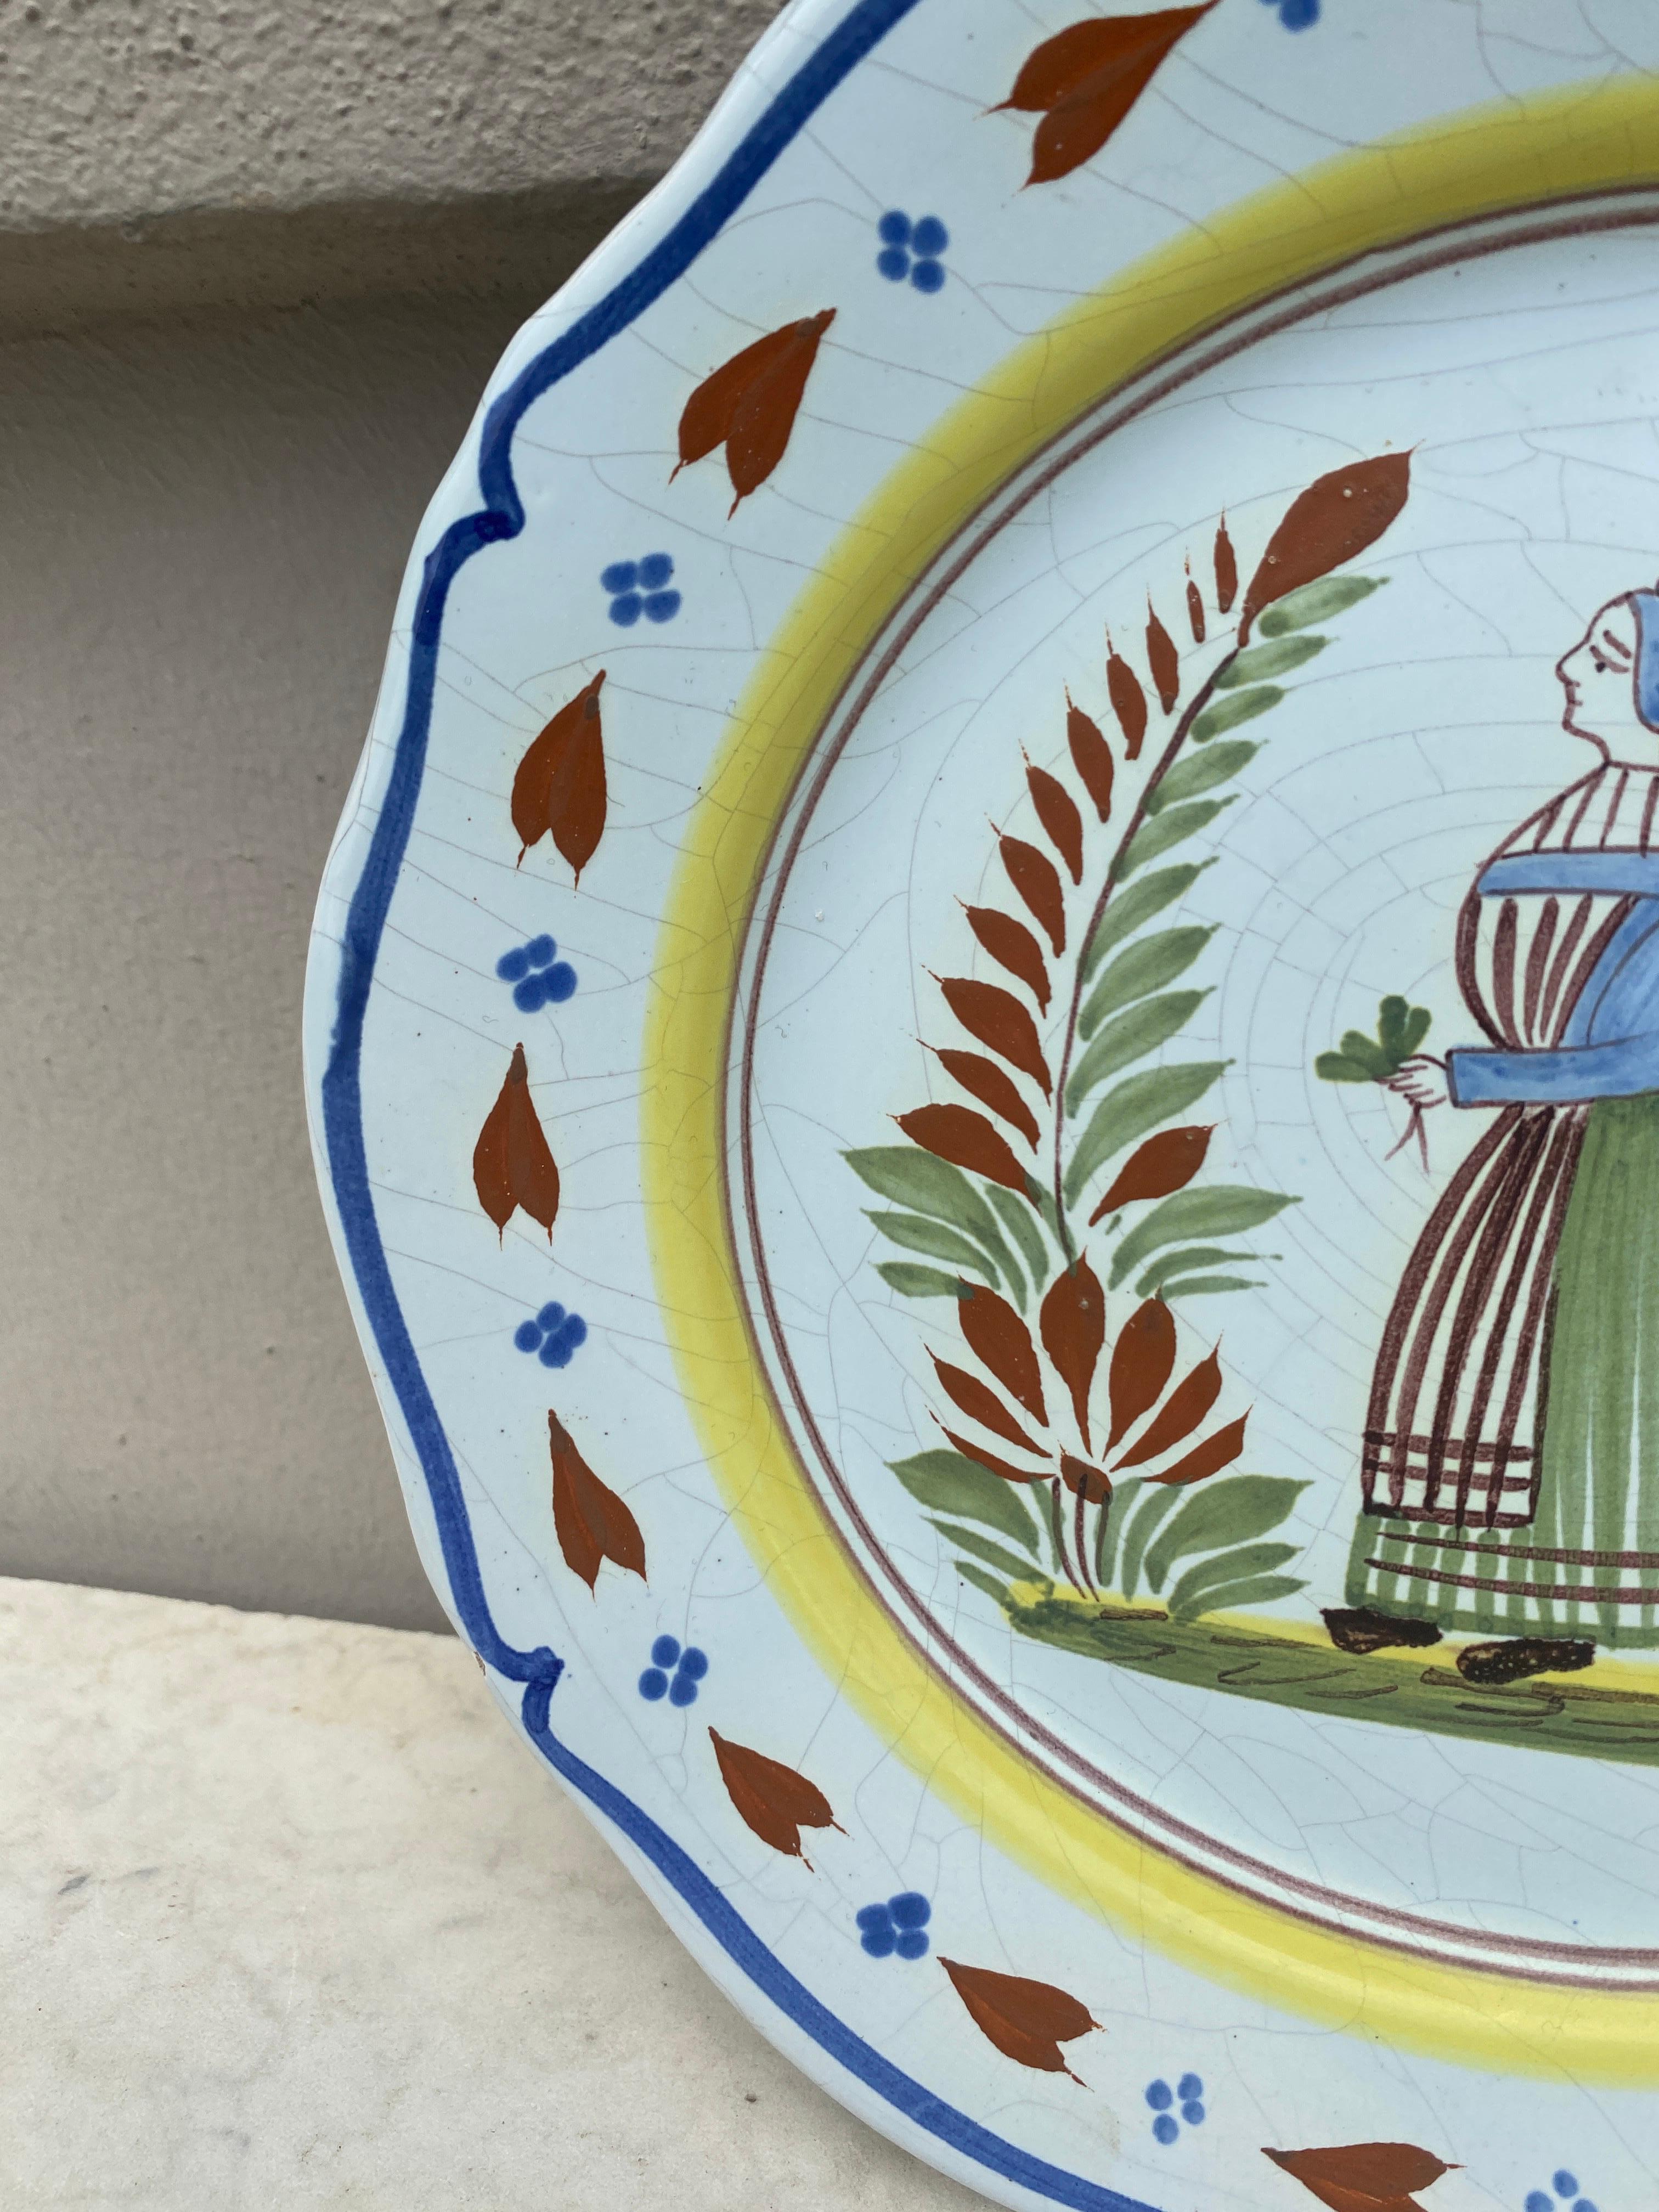 French Faience plate quimper circa 1950.
Breton with flowers.